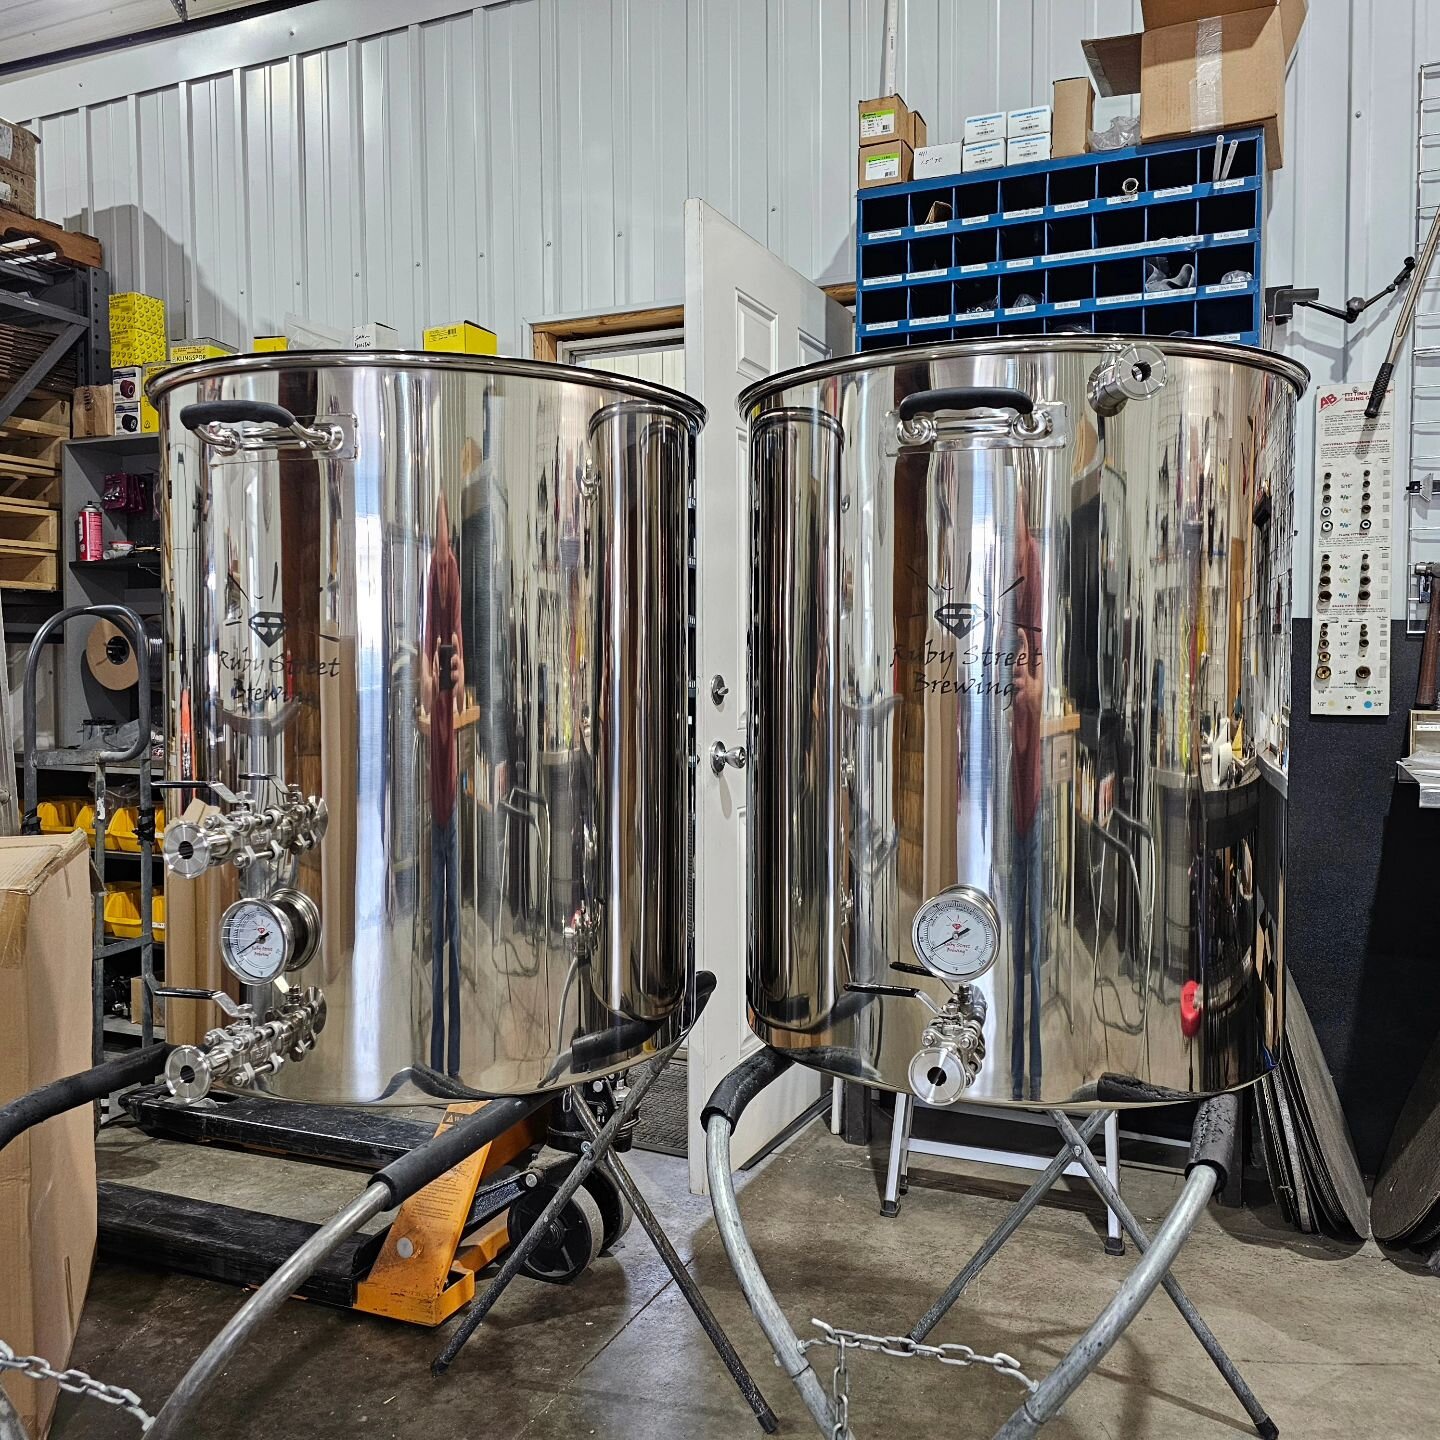 Need some custom kettles?  We offer built to order kettles in 15.5, 25 and 50 gallon sizes.  We can outfit your kettles with fully welded sanitary fittings or our proprietary rock solid weldless fittings as needed to match your budget and specific ne